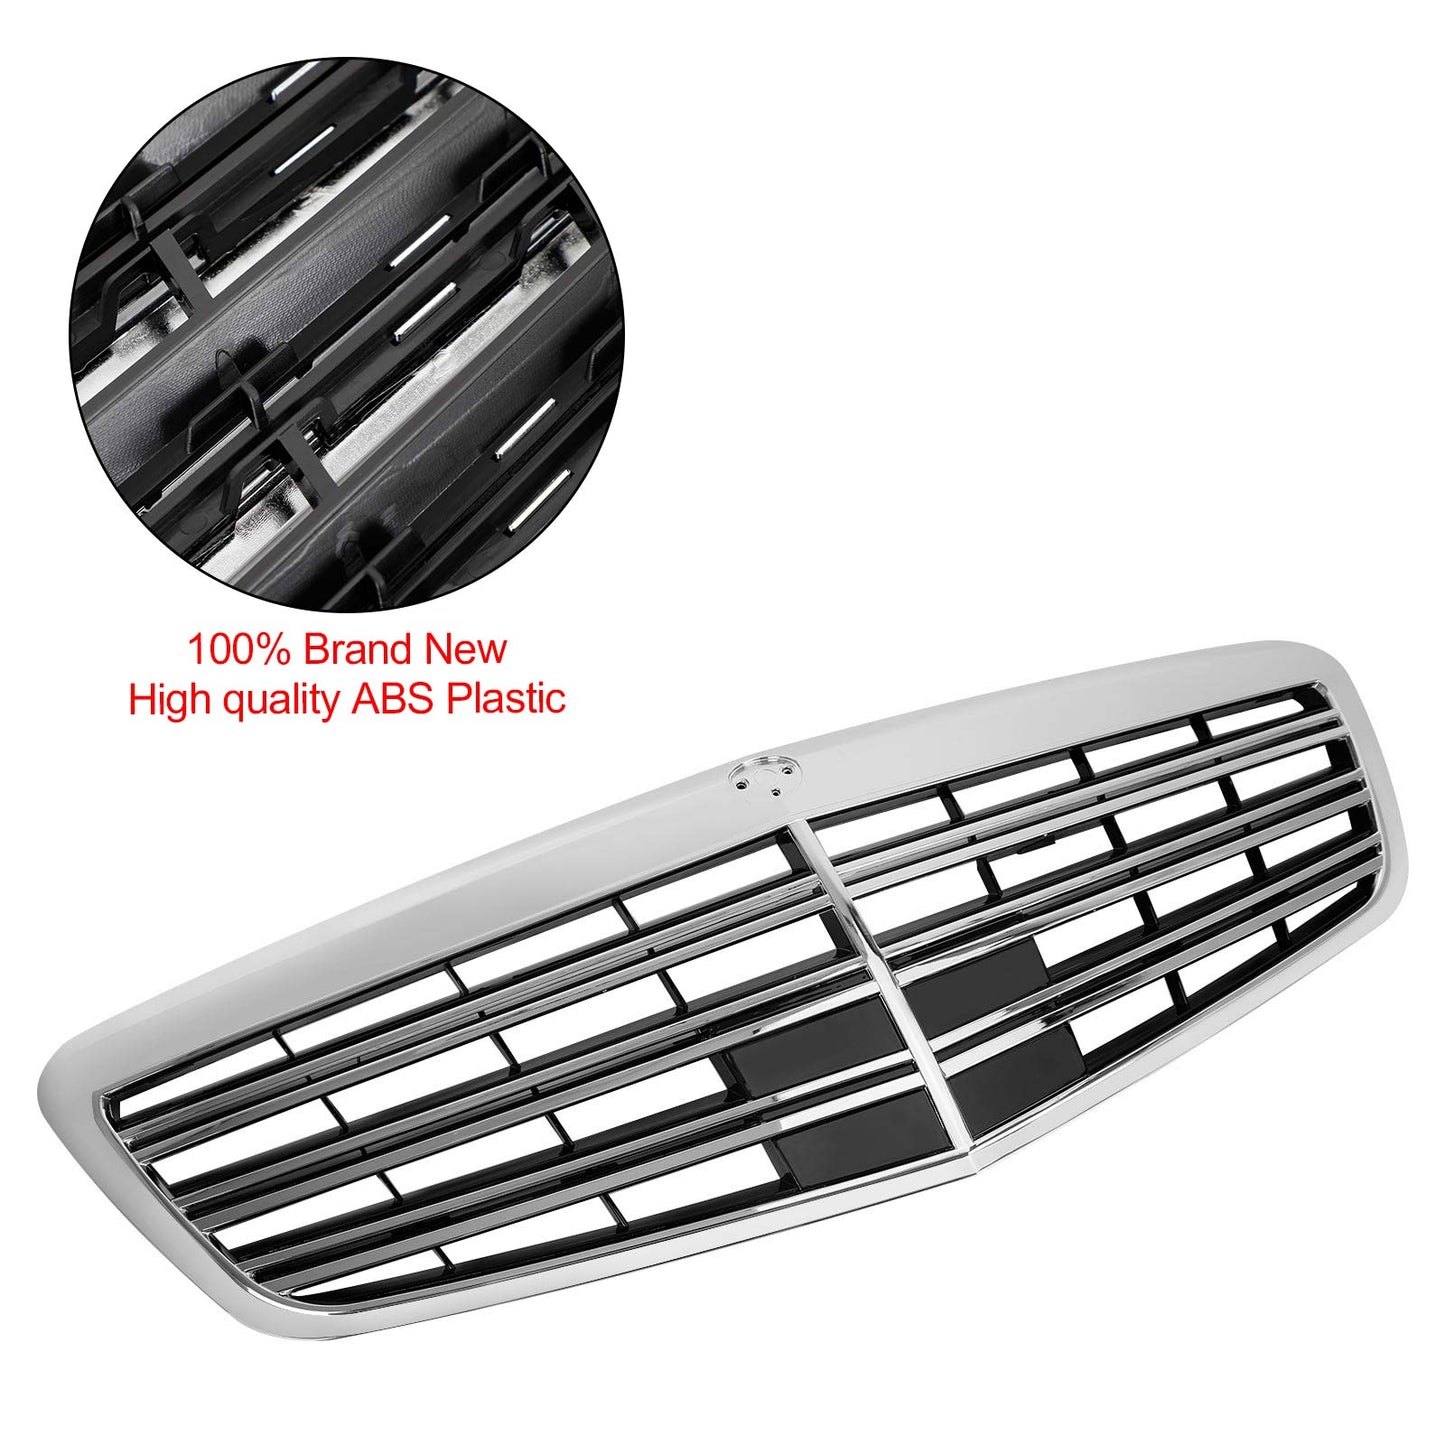 AMG style Front Grille Grill Für Mercedes Benz S-Class W221 S550 S600 S63 S65